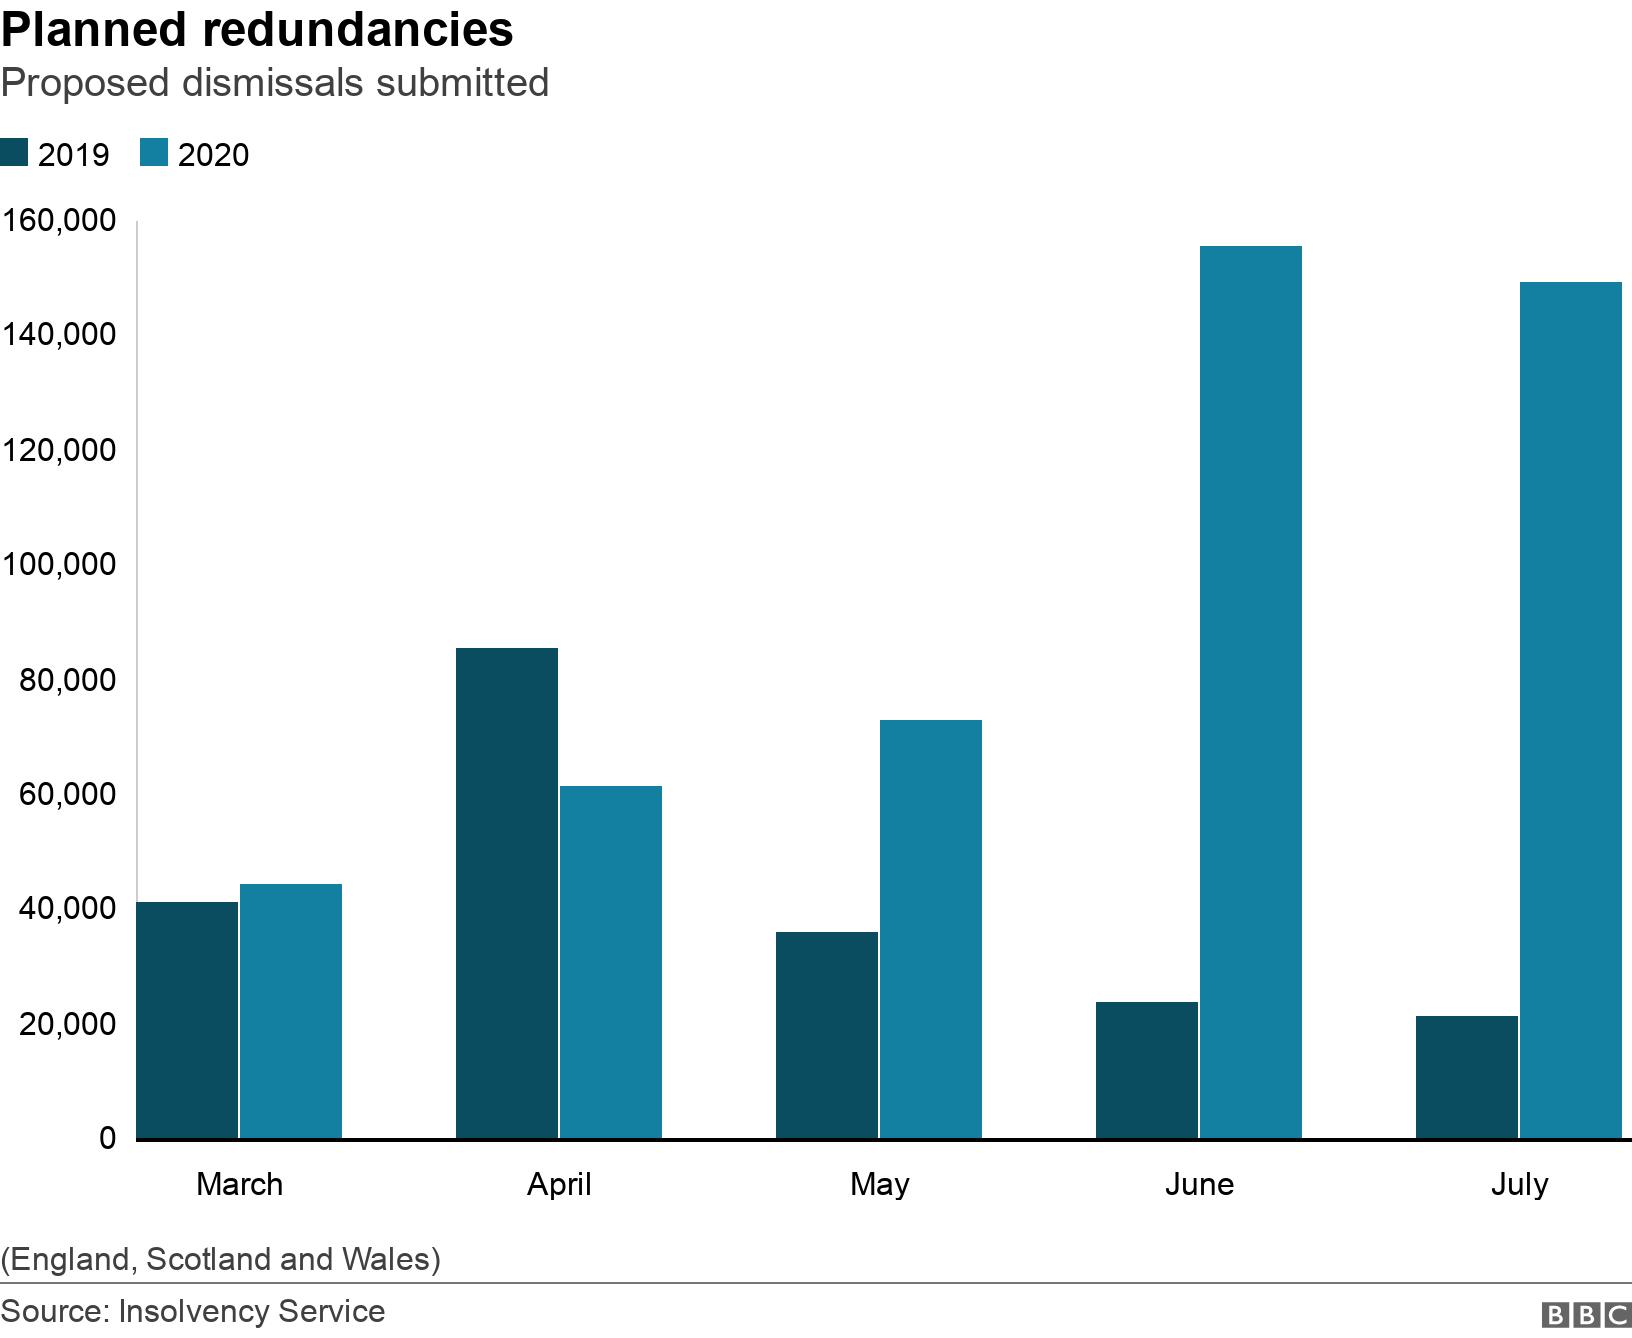 Planned redundancies. Proposed dismissals submitted. Column chart showing redundancies planned by month, from March to July 2020 with 2019 data added for comparison (England, Scotland and Wales).